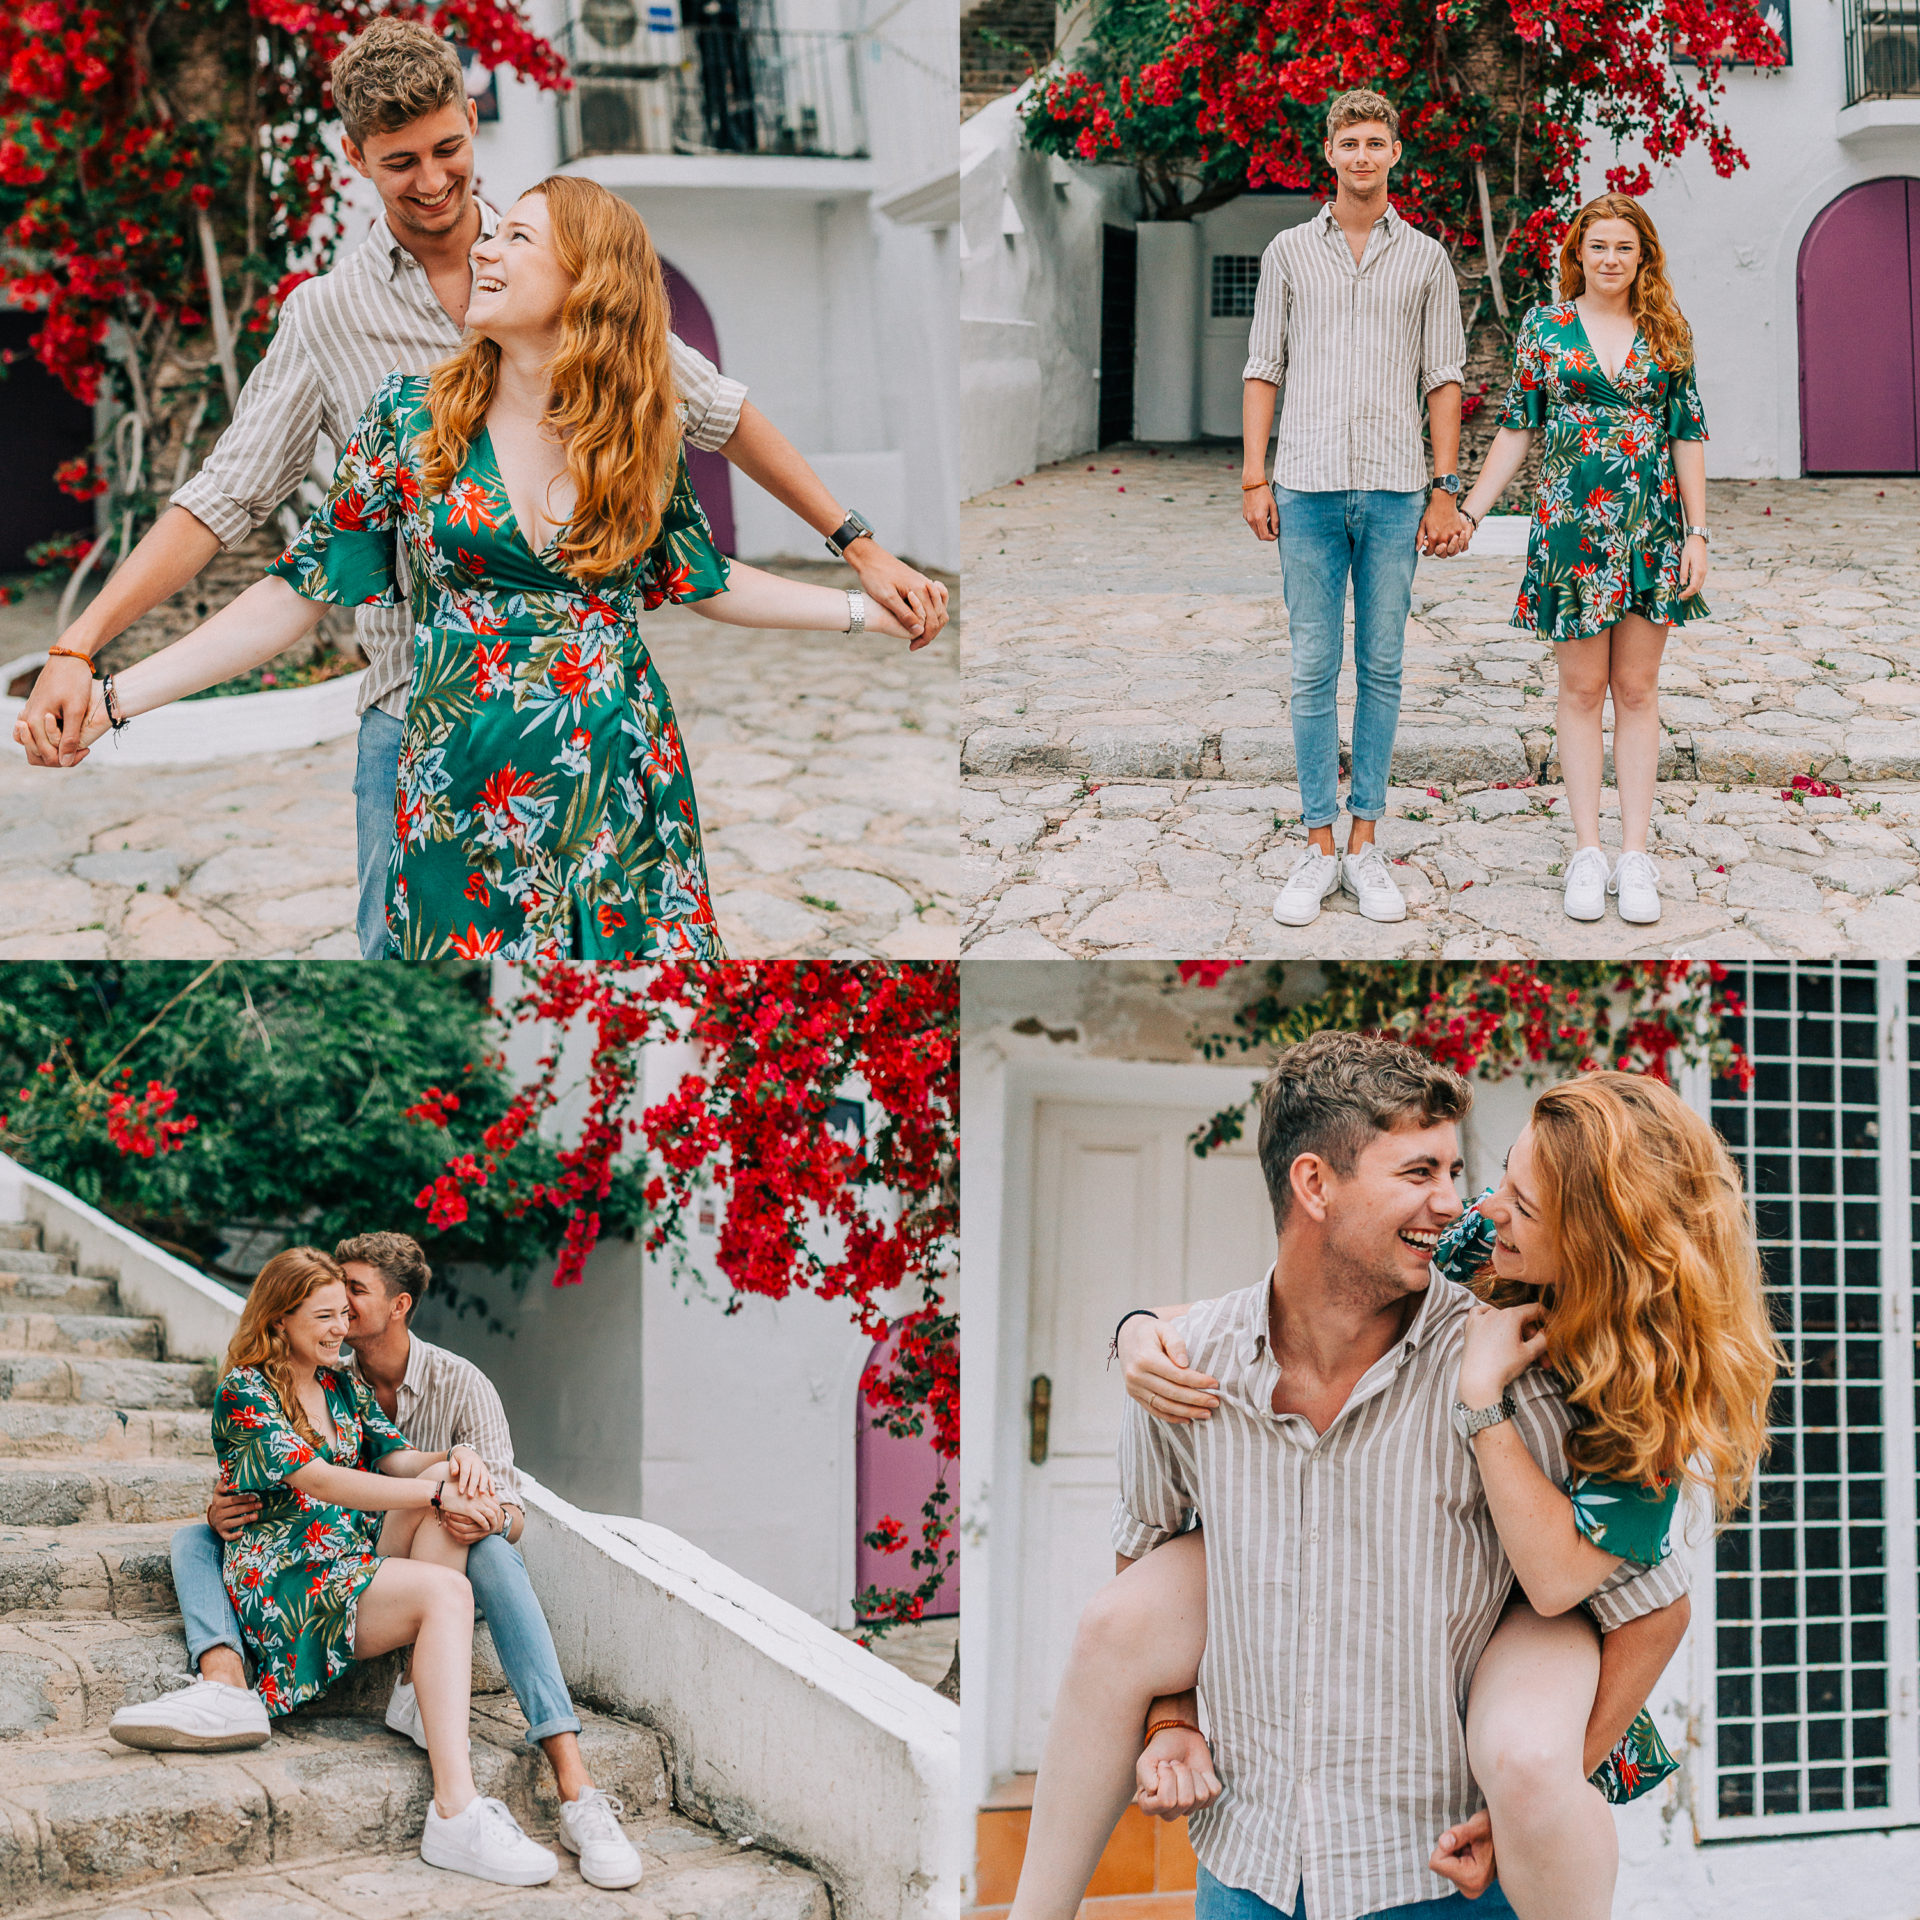 Martijn-Julia-Preview-1920x1920 Year in review 2019 Branding Engagement Personal Wedding 